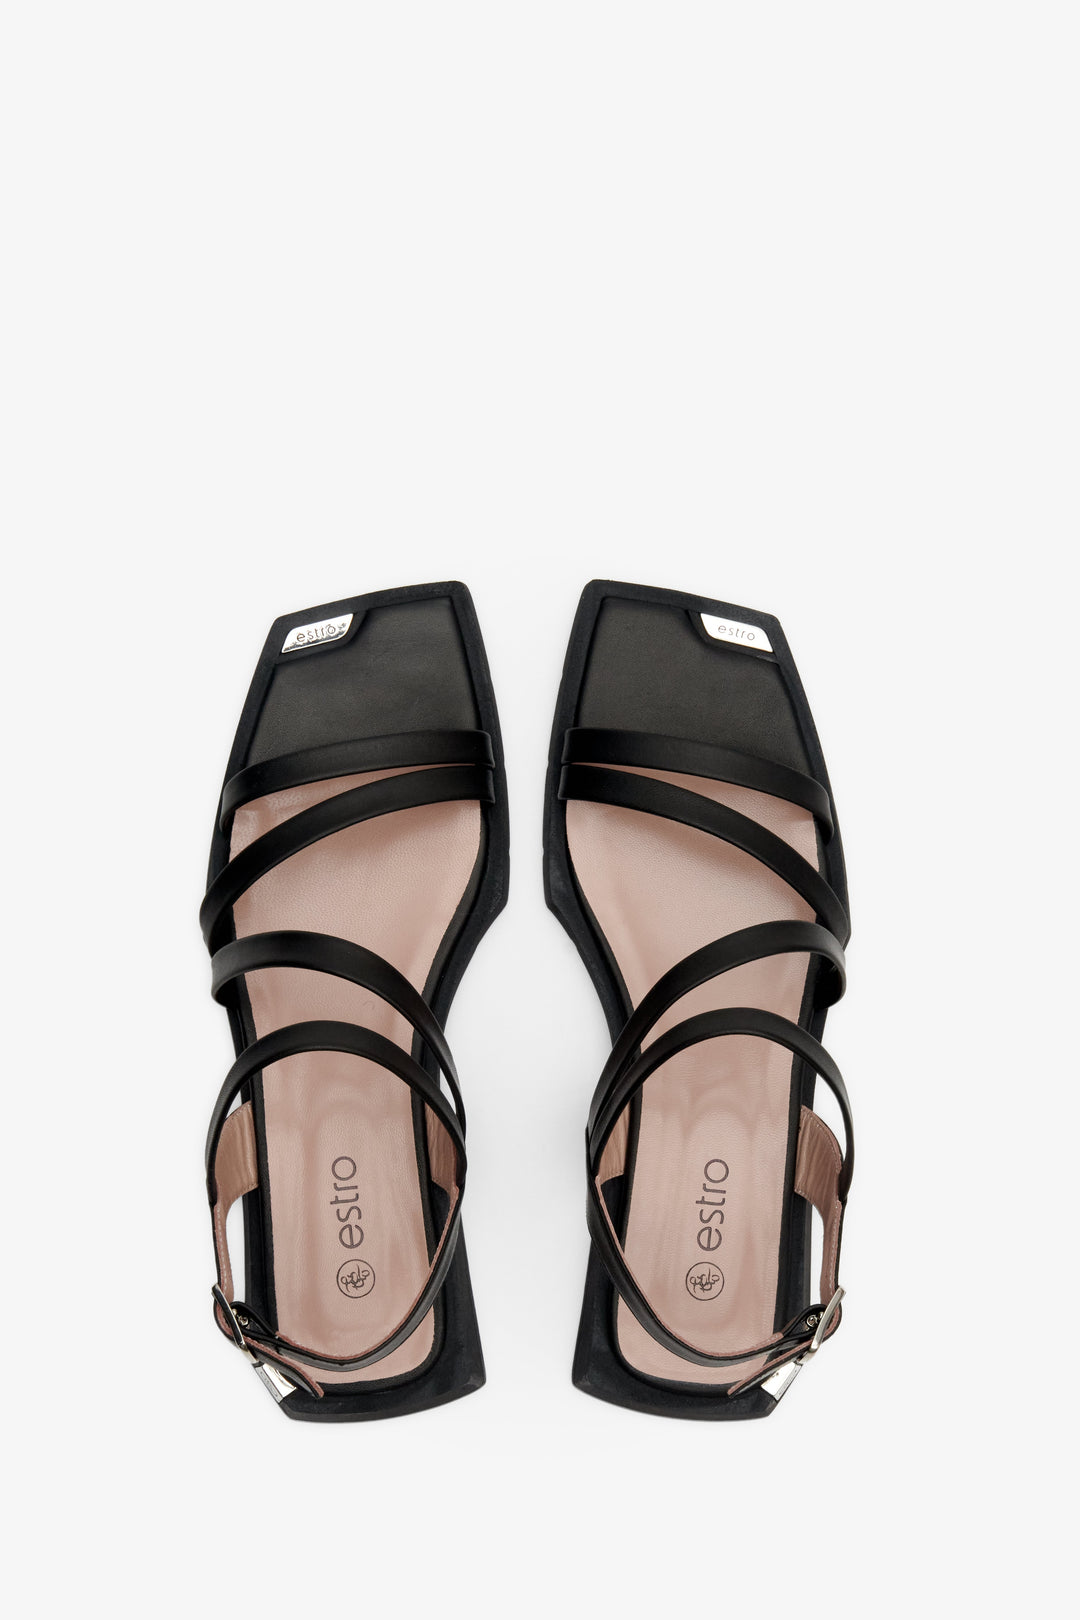 Leather, women's black summer sandals by Estro - presentation of the footwear from the top.